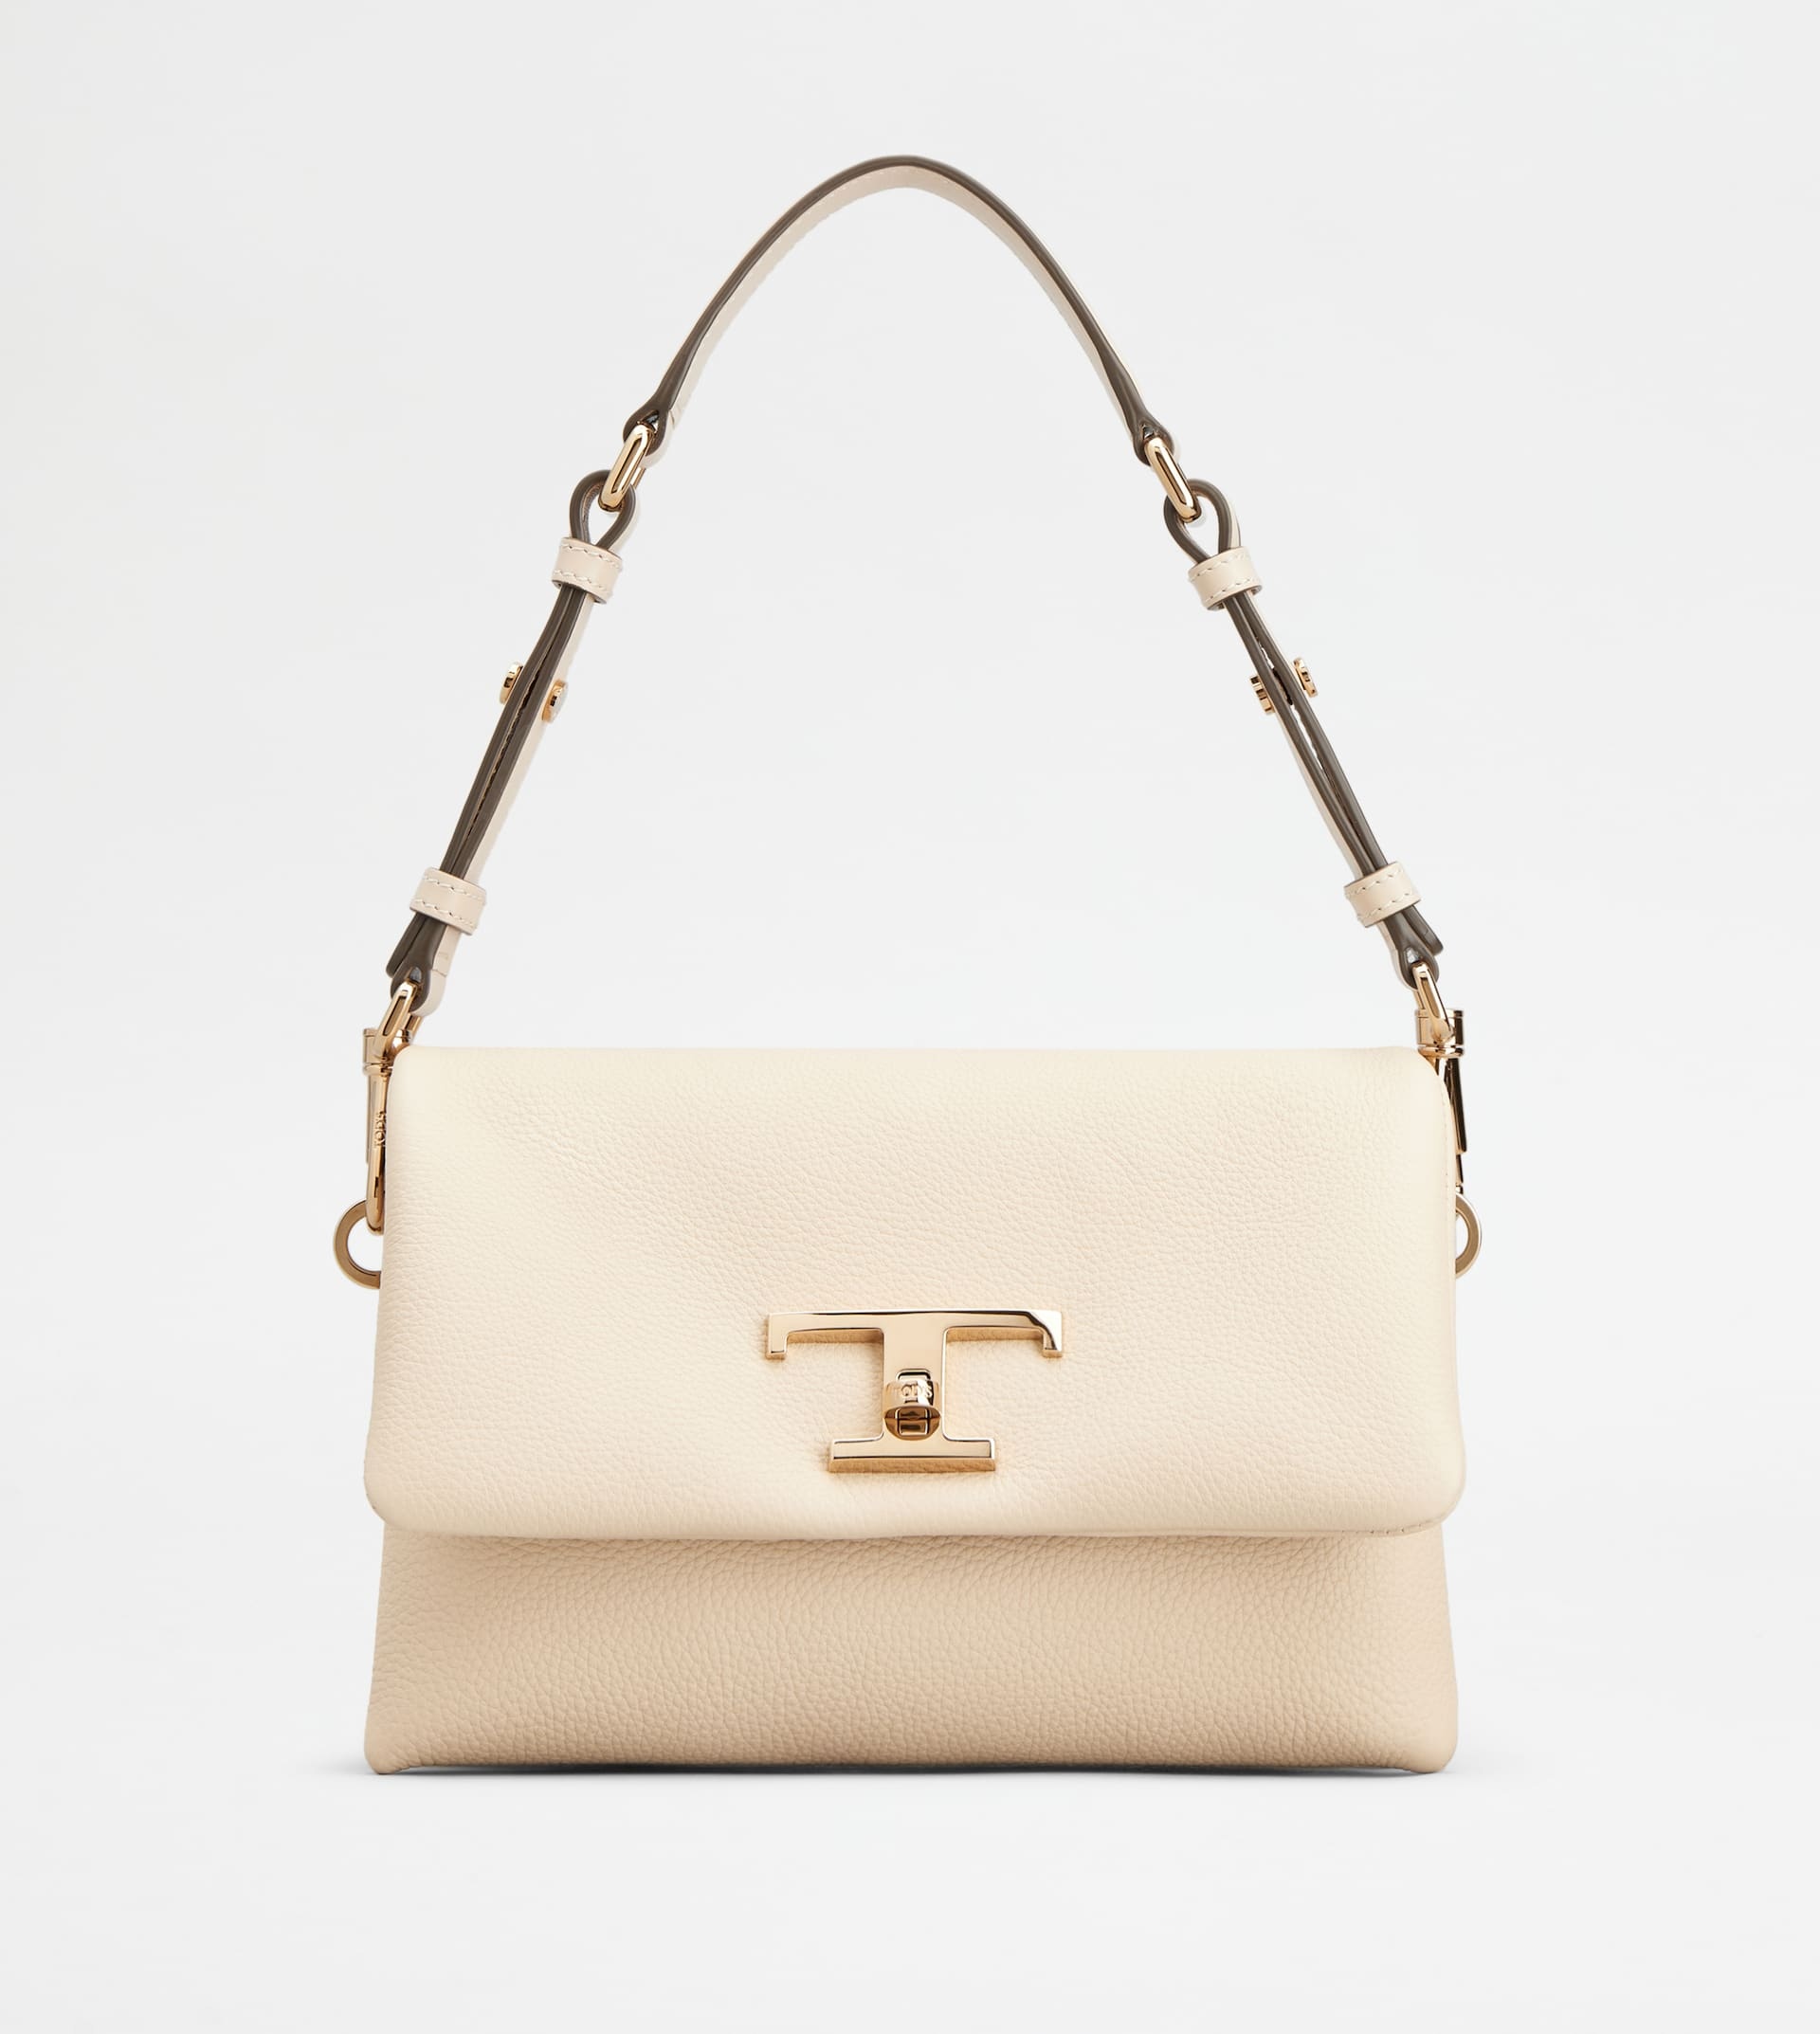 T TIMELESS FLAP BAG IN LEATHER MINI - BEIGE - 1